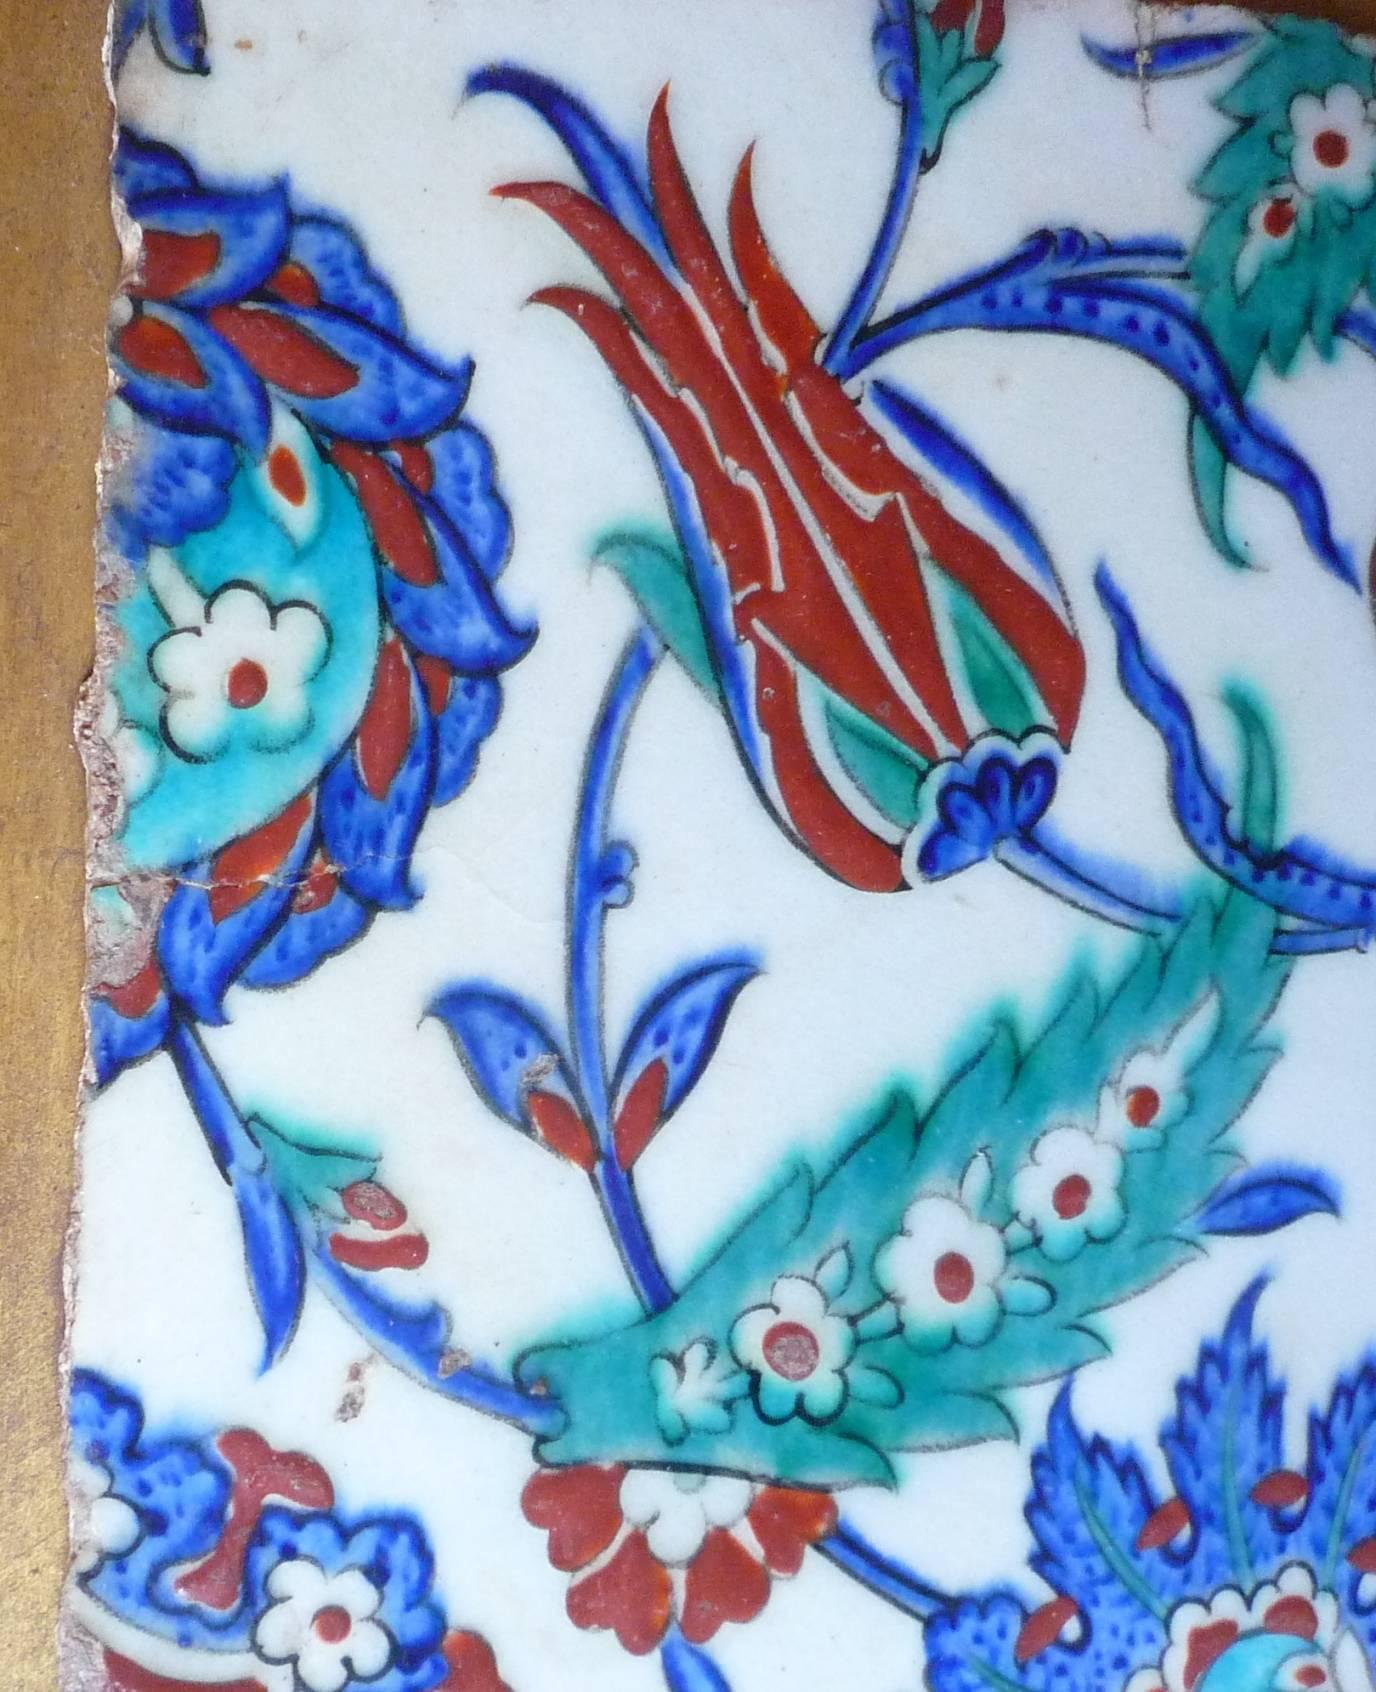 Turkish Ottoman Iznik Ceramic Tile with Tulips and Other Flowers, 16th Century